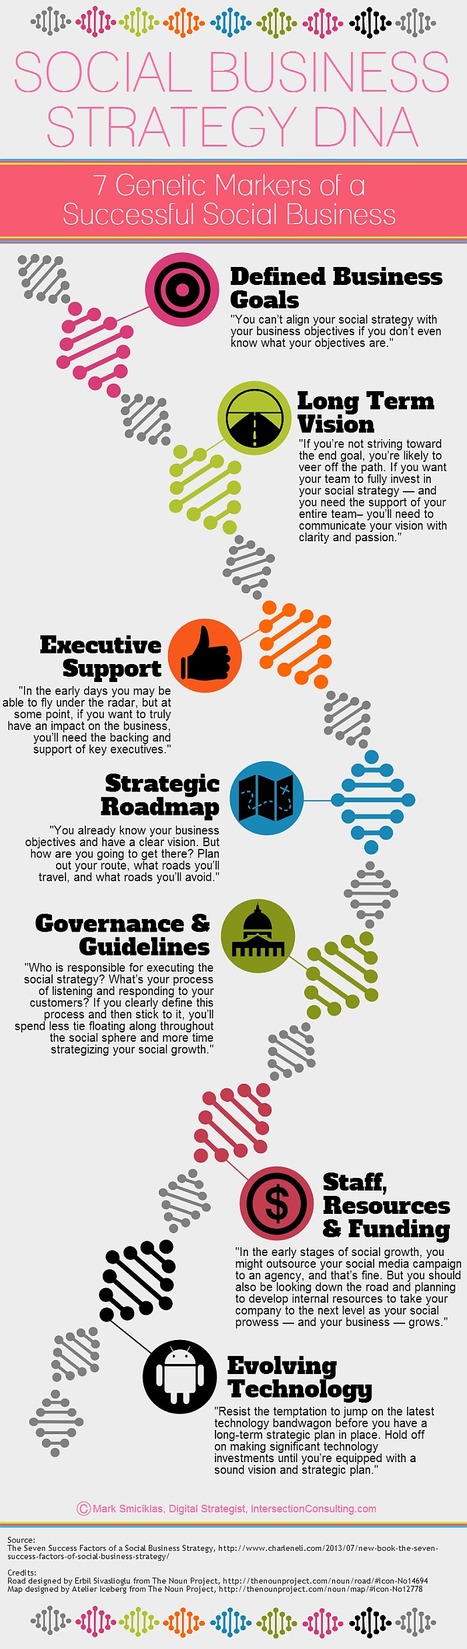 Social Business Strategy DNA [Infographic] - Social Media Explorer | #TheMarketingAutomationAlert | The MarTech Digest | Scoop.it